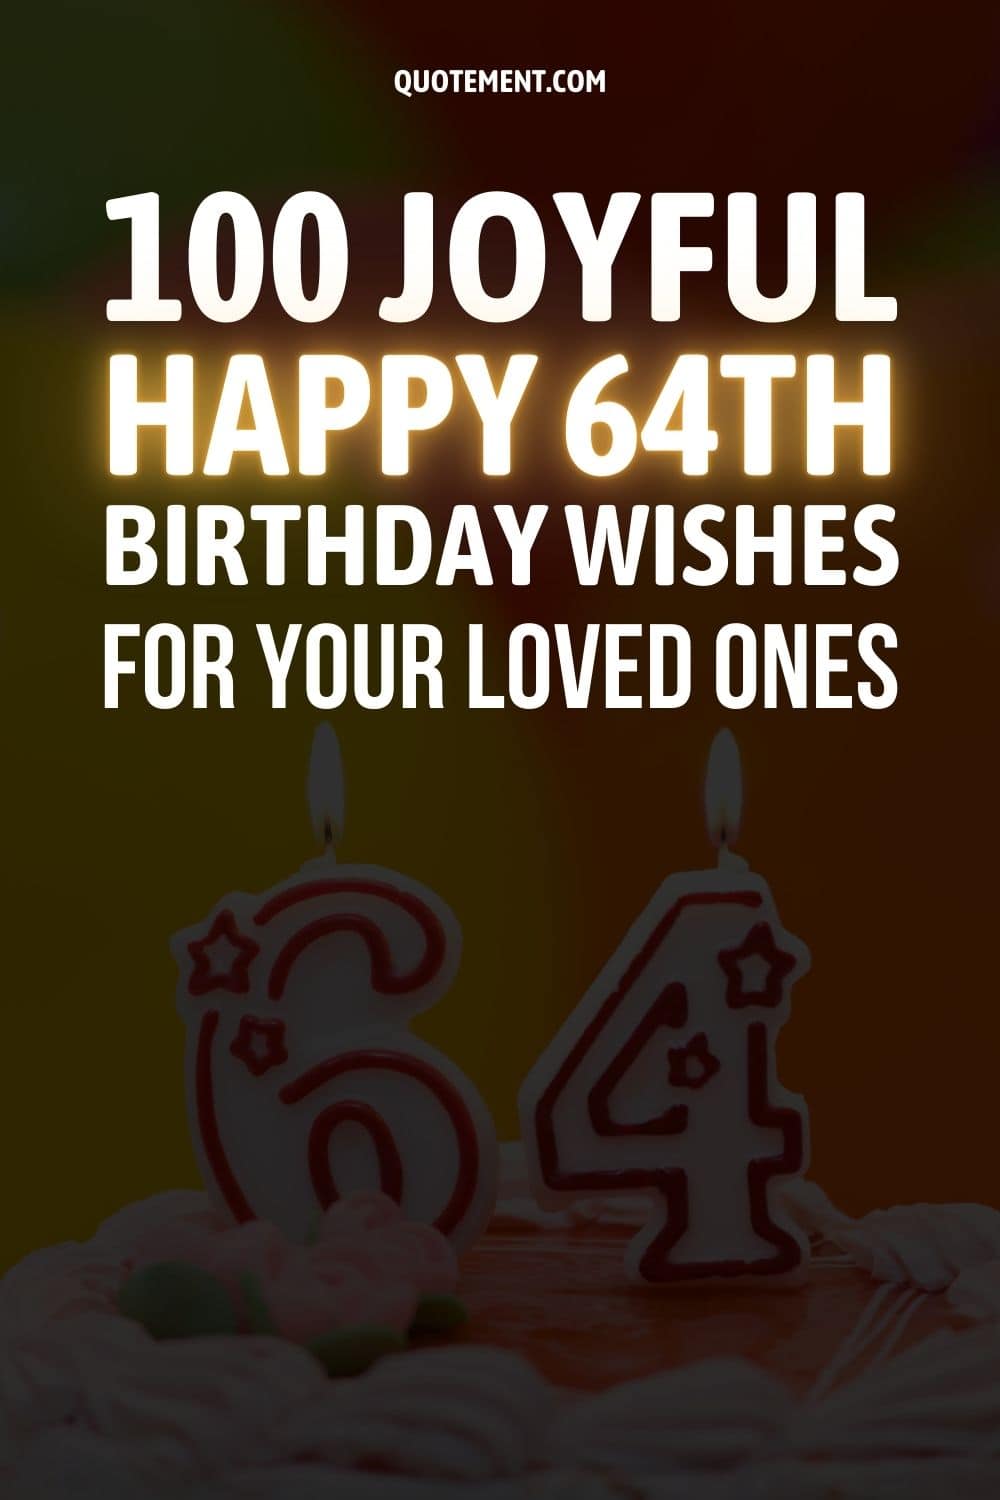 100 Joyful Happy 64th Birthday Wishes For Your Loved Ones
